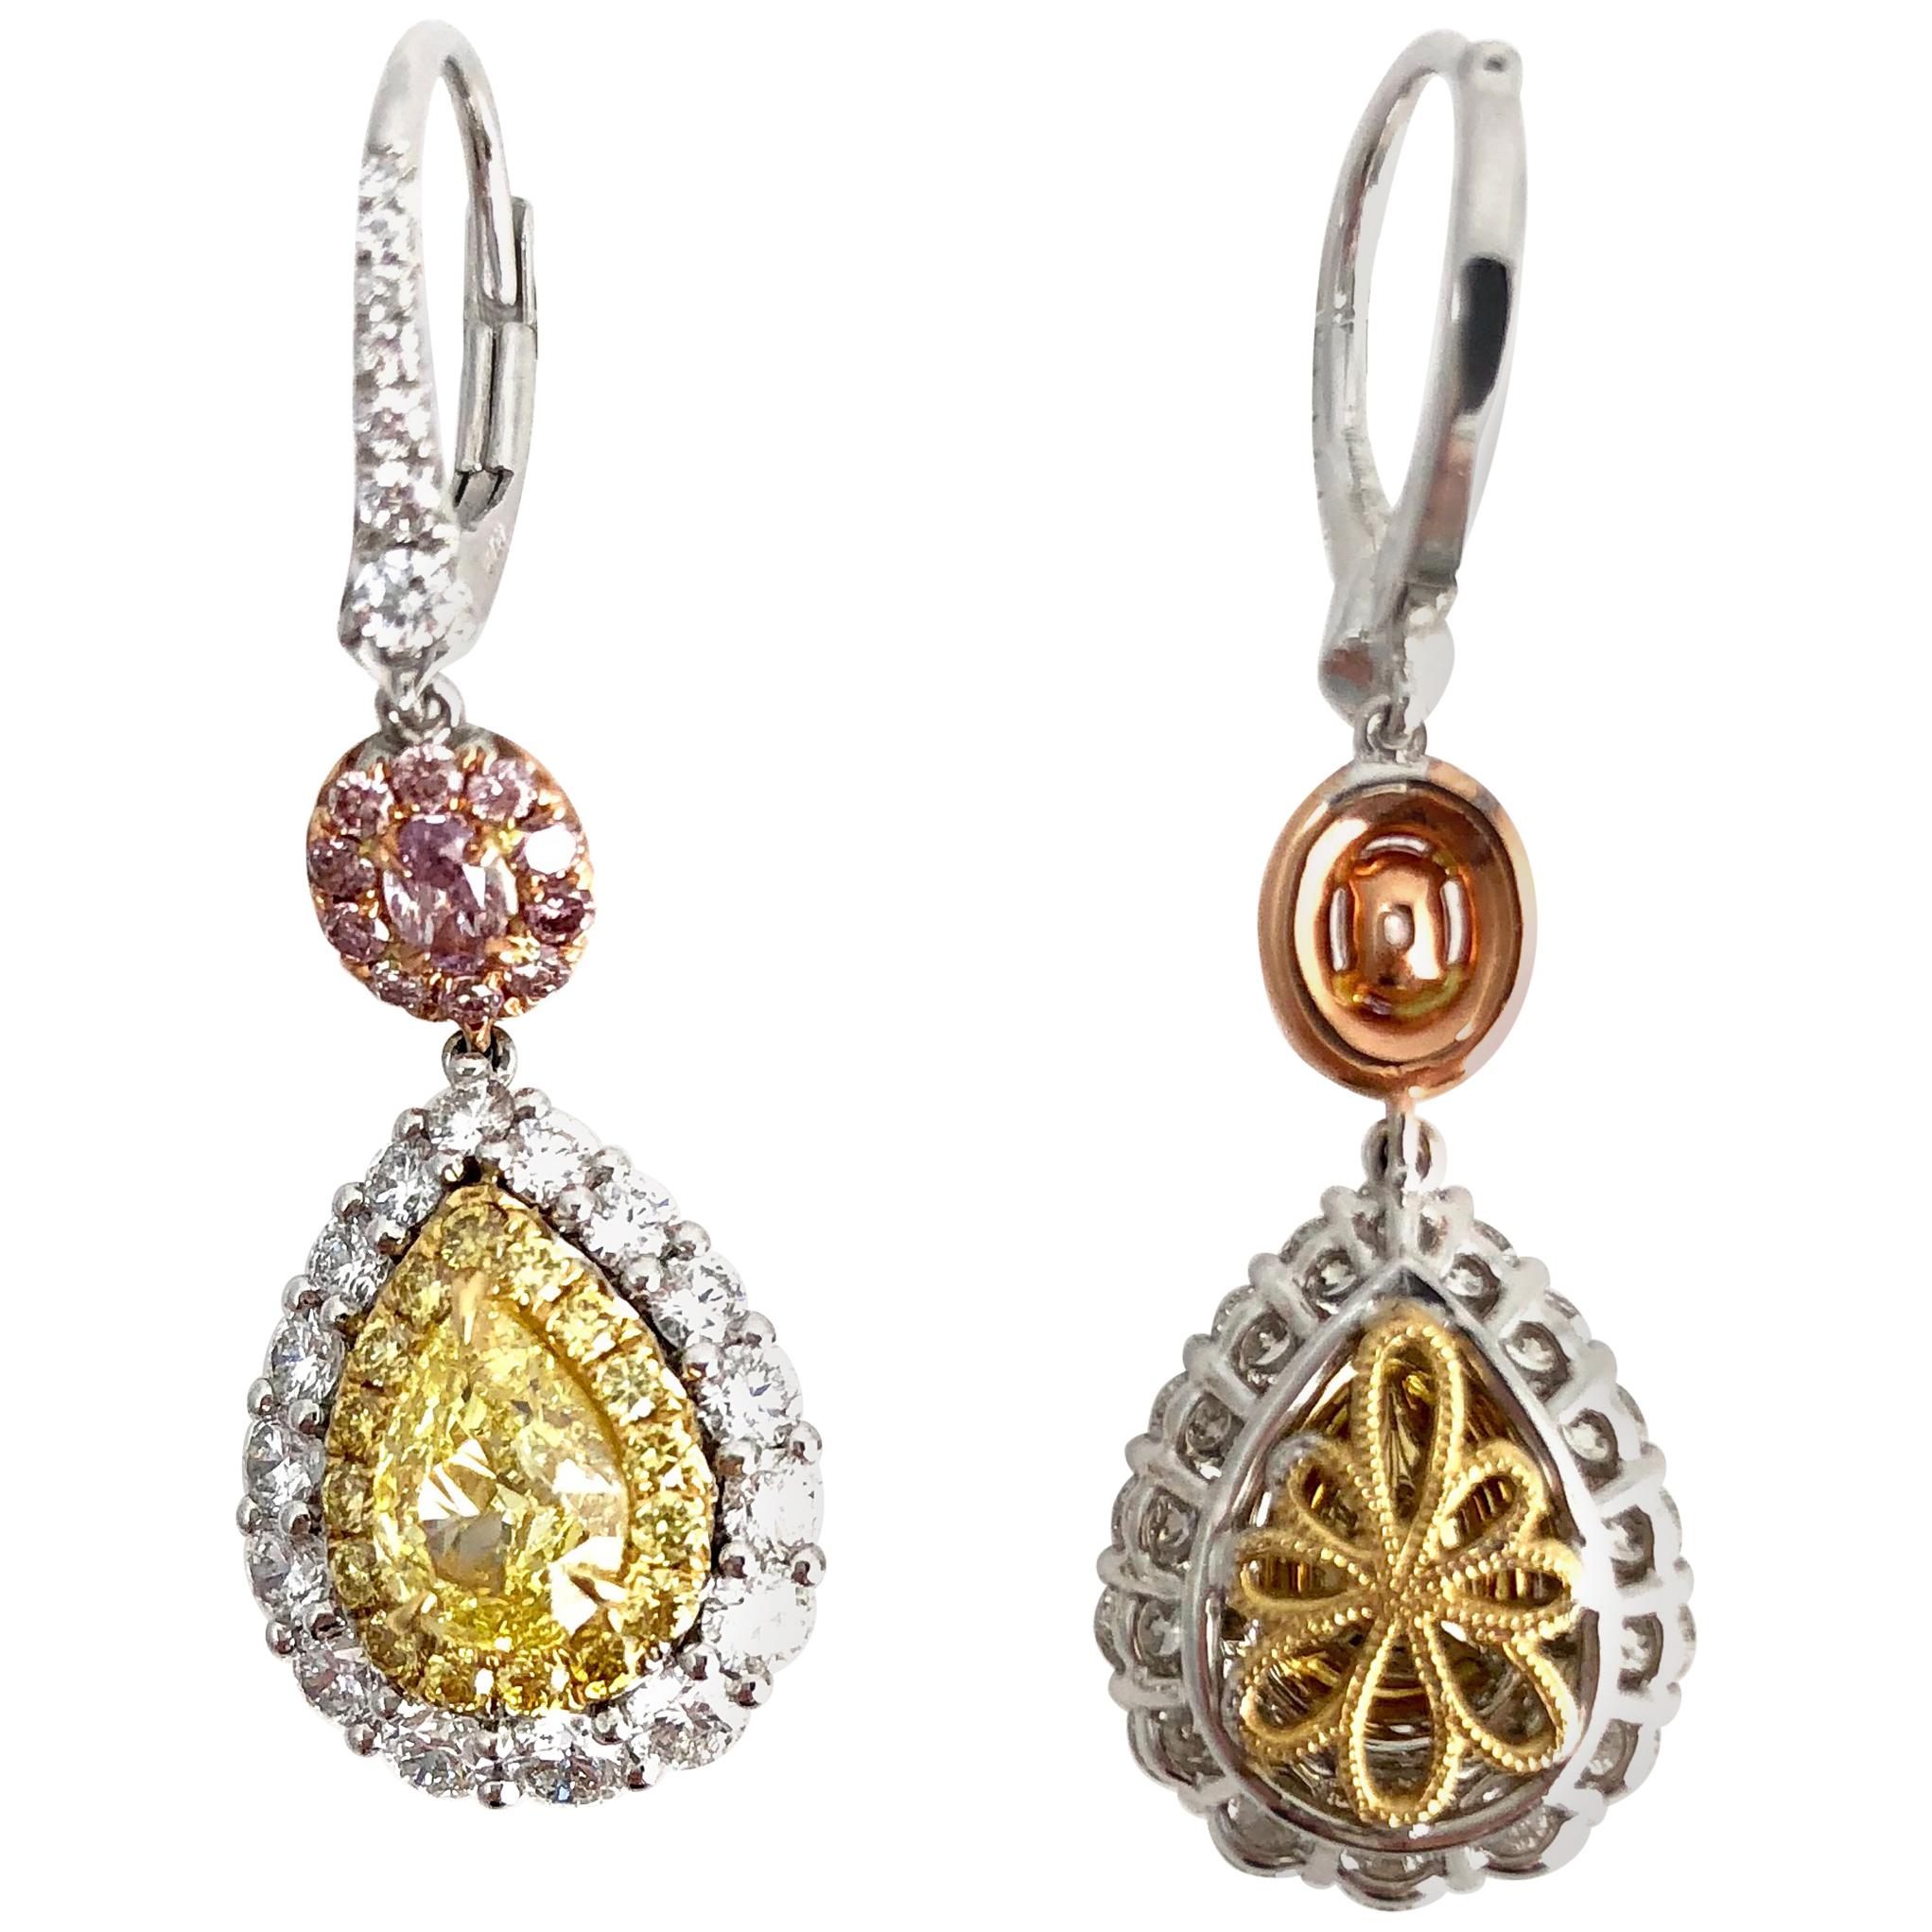 3.82 Ct T.W. GIA Certified Natural Fcy Yellow and Pink Diamond Earrings ref1072 For Sale